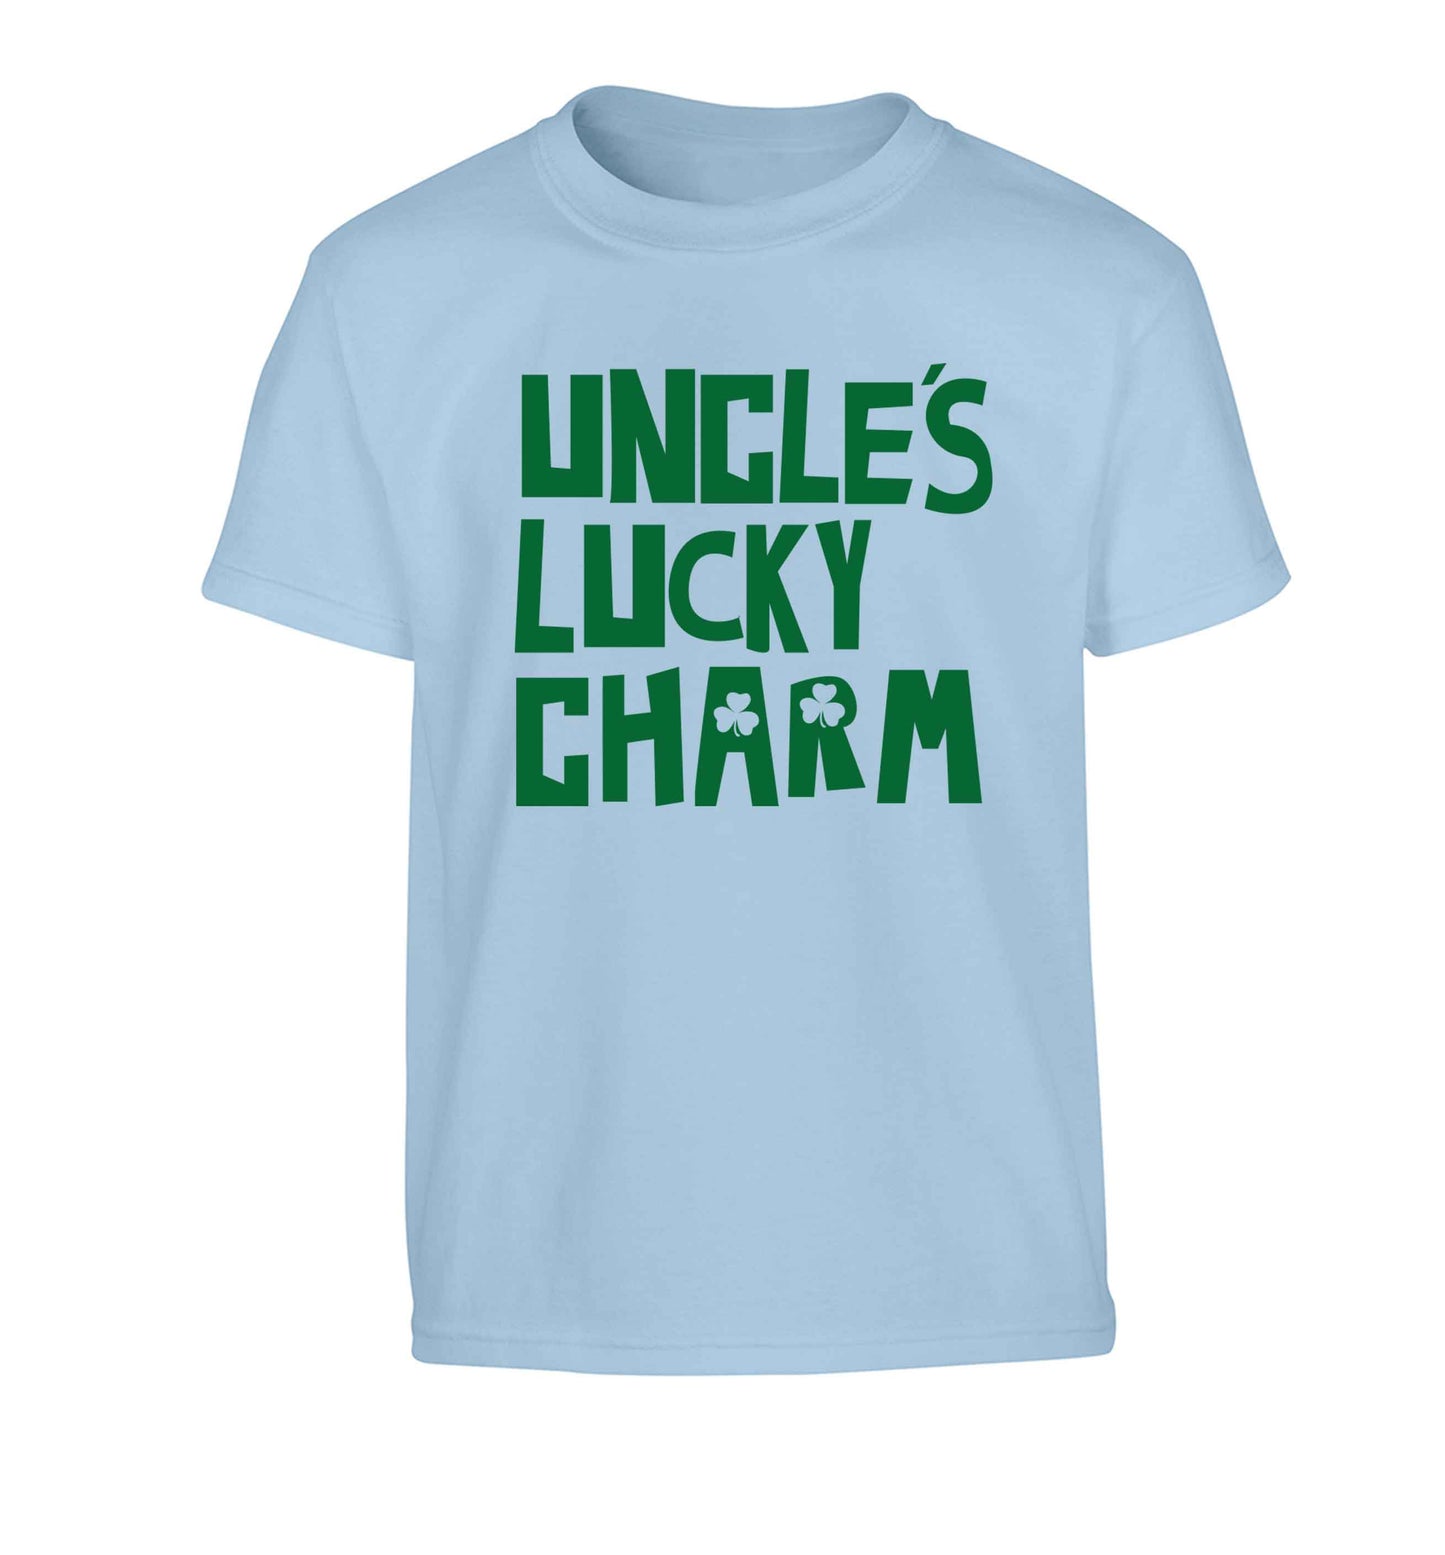 Uncles lucky charm Children's light blue Tshirt 12-13 Years